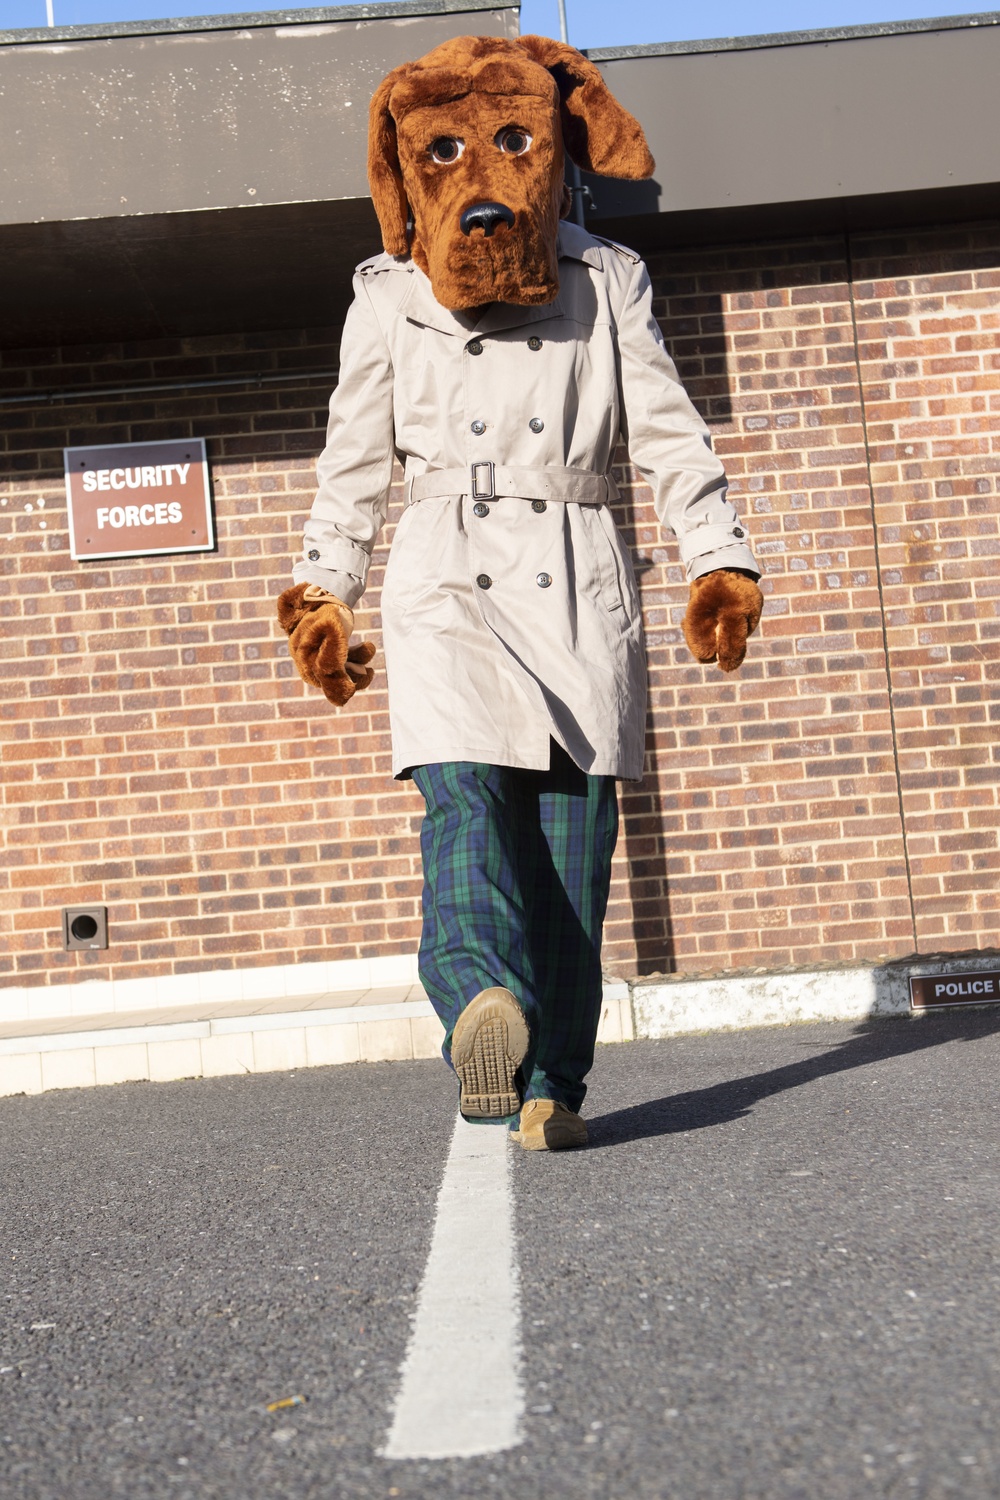 McGruff the Crime Dog encourages safety in 501CSW